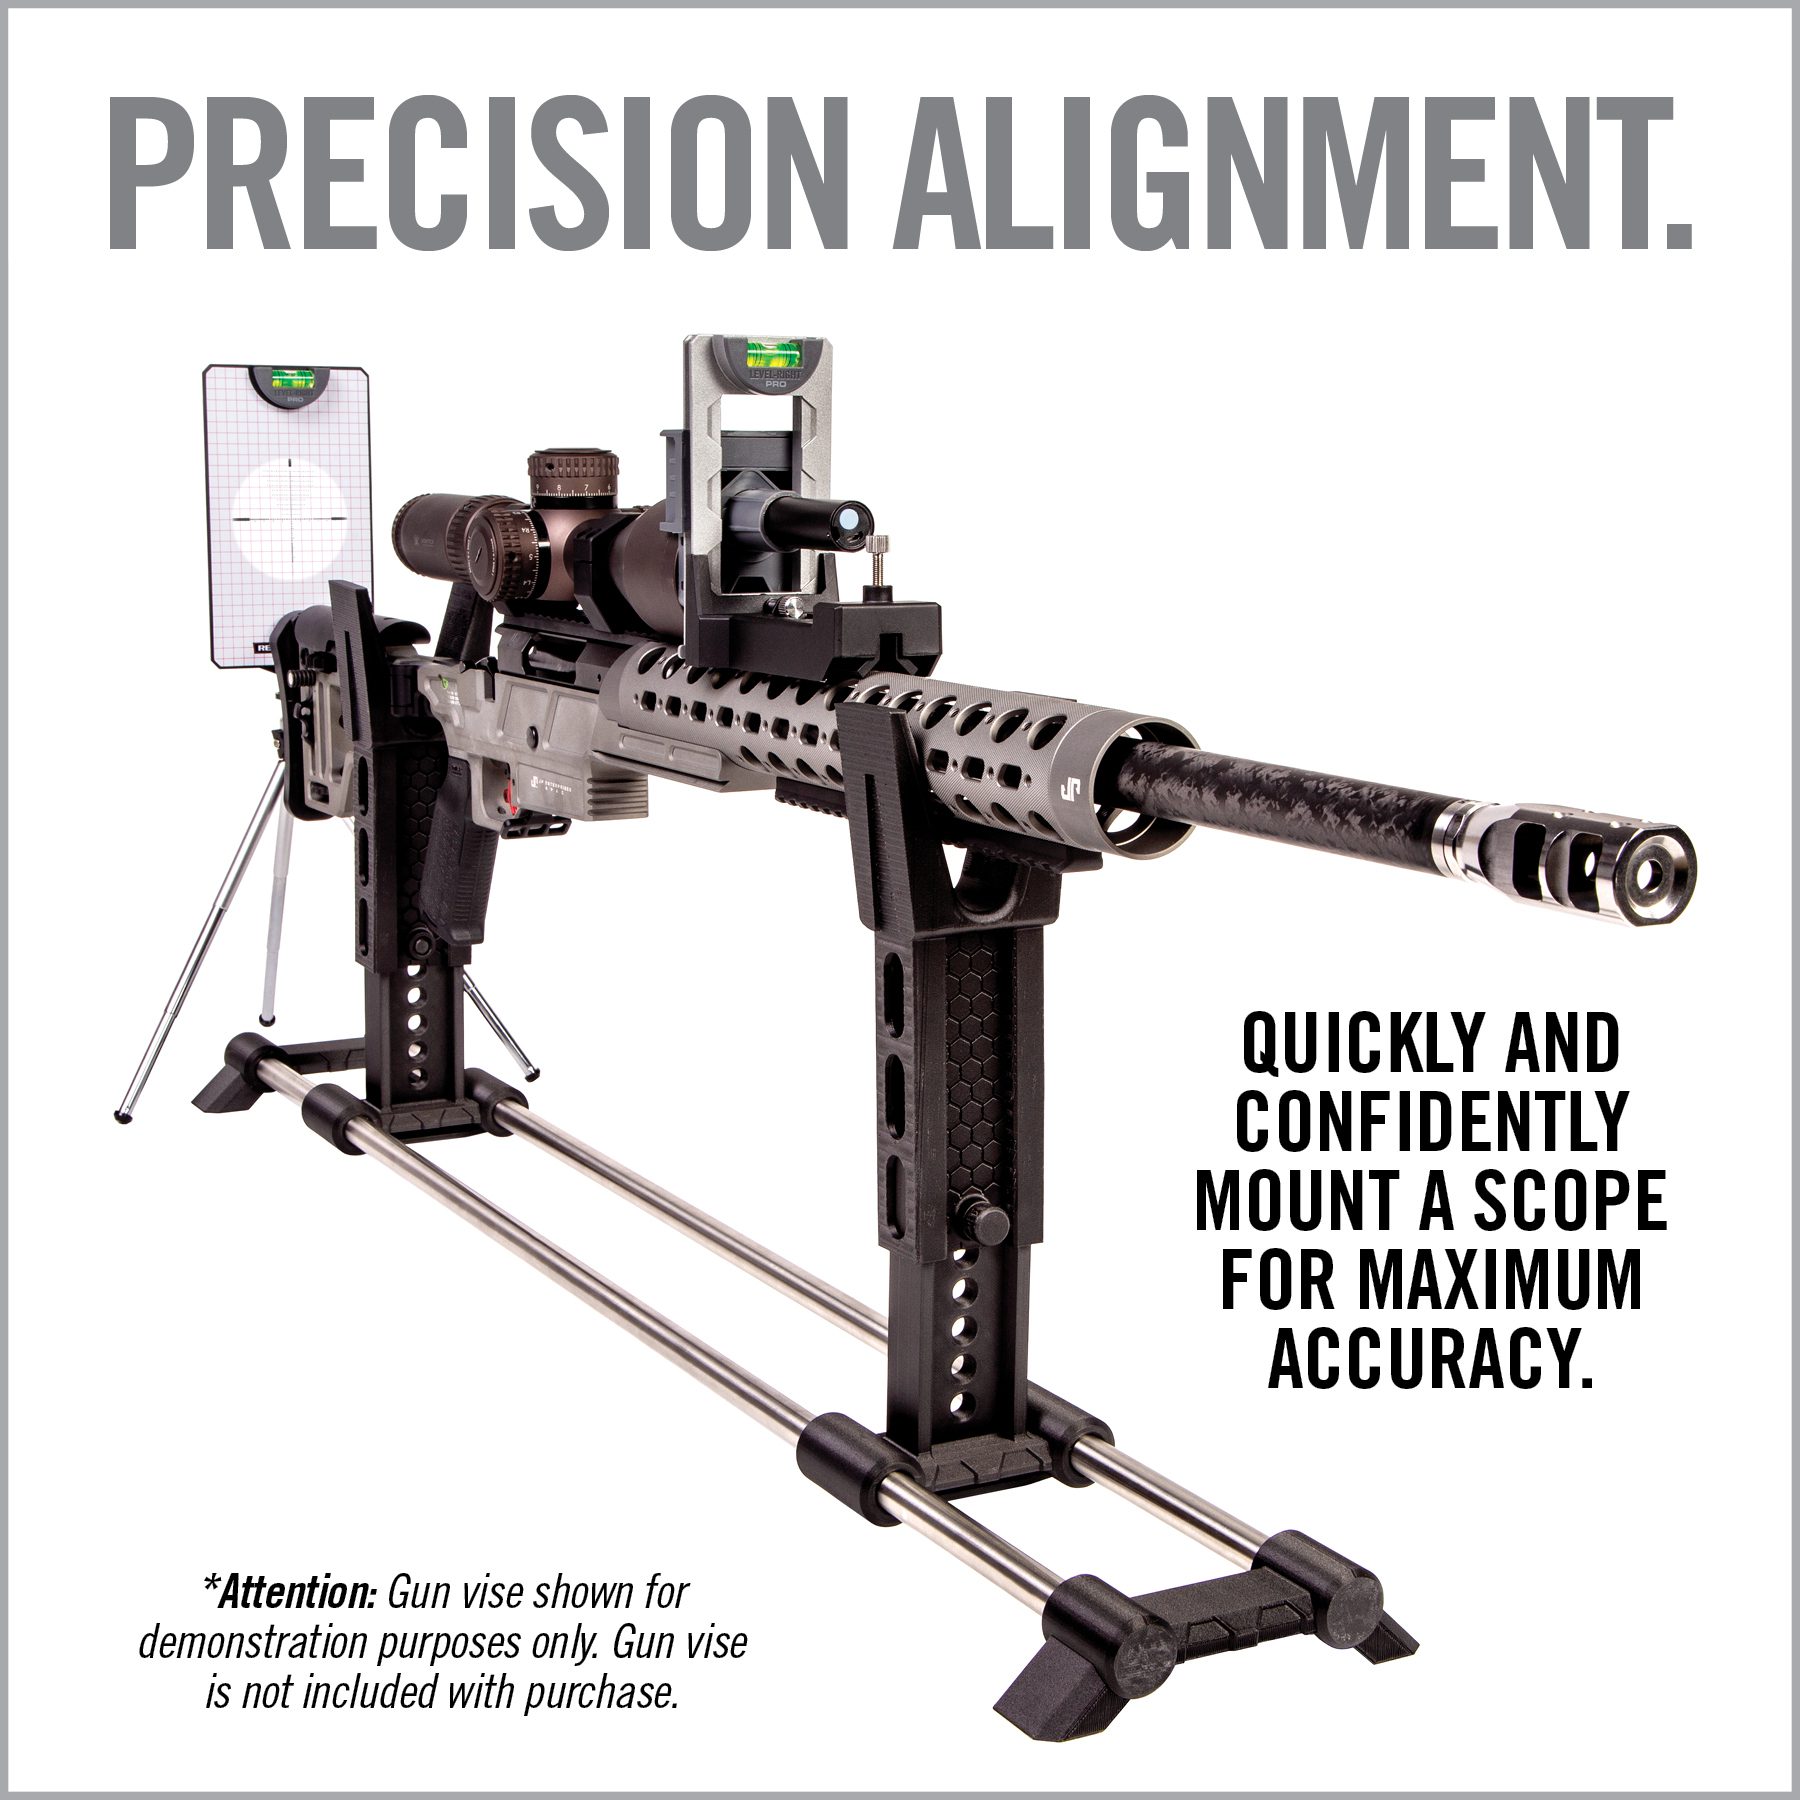 an advertisement for precision alignment